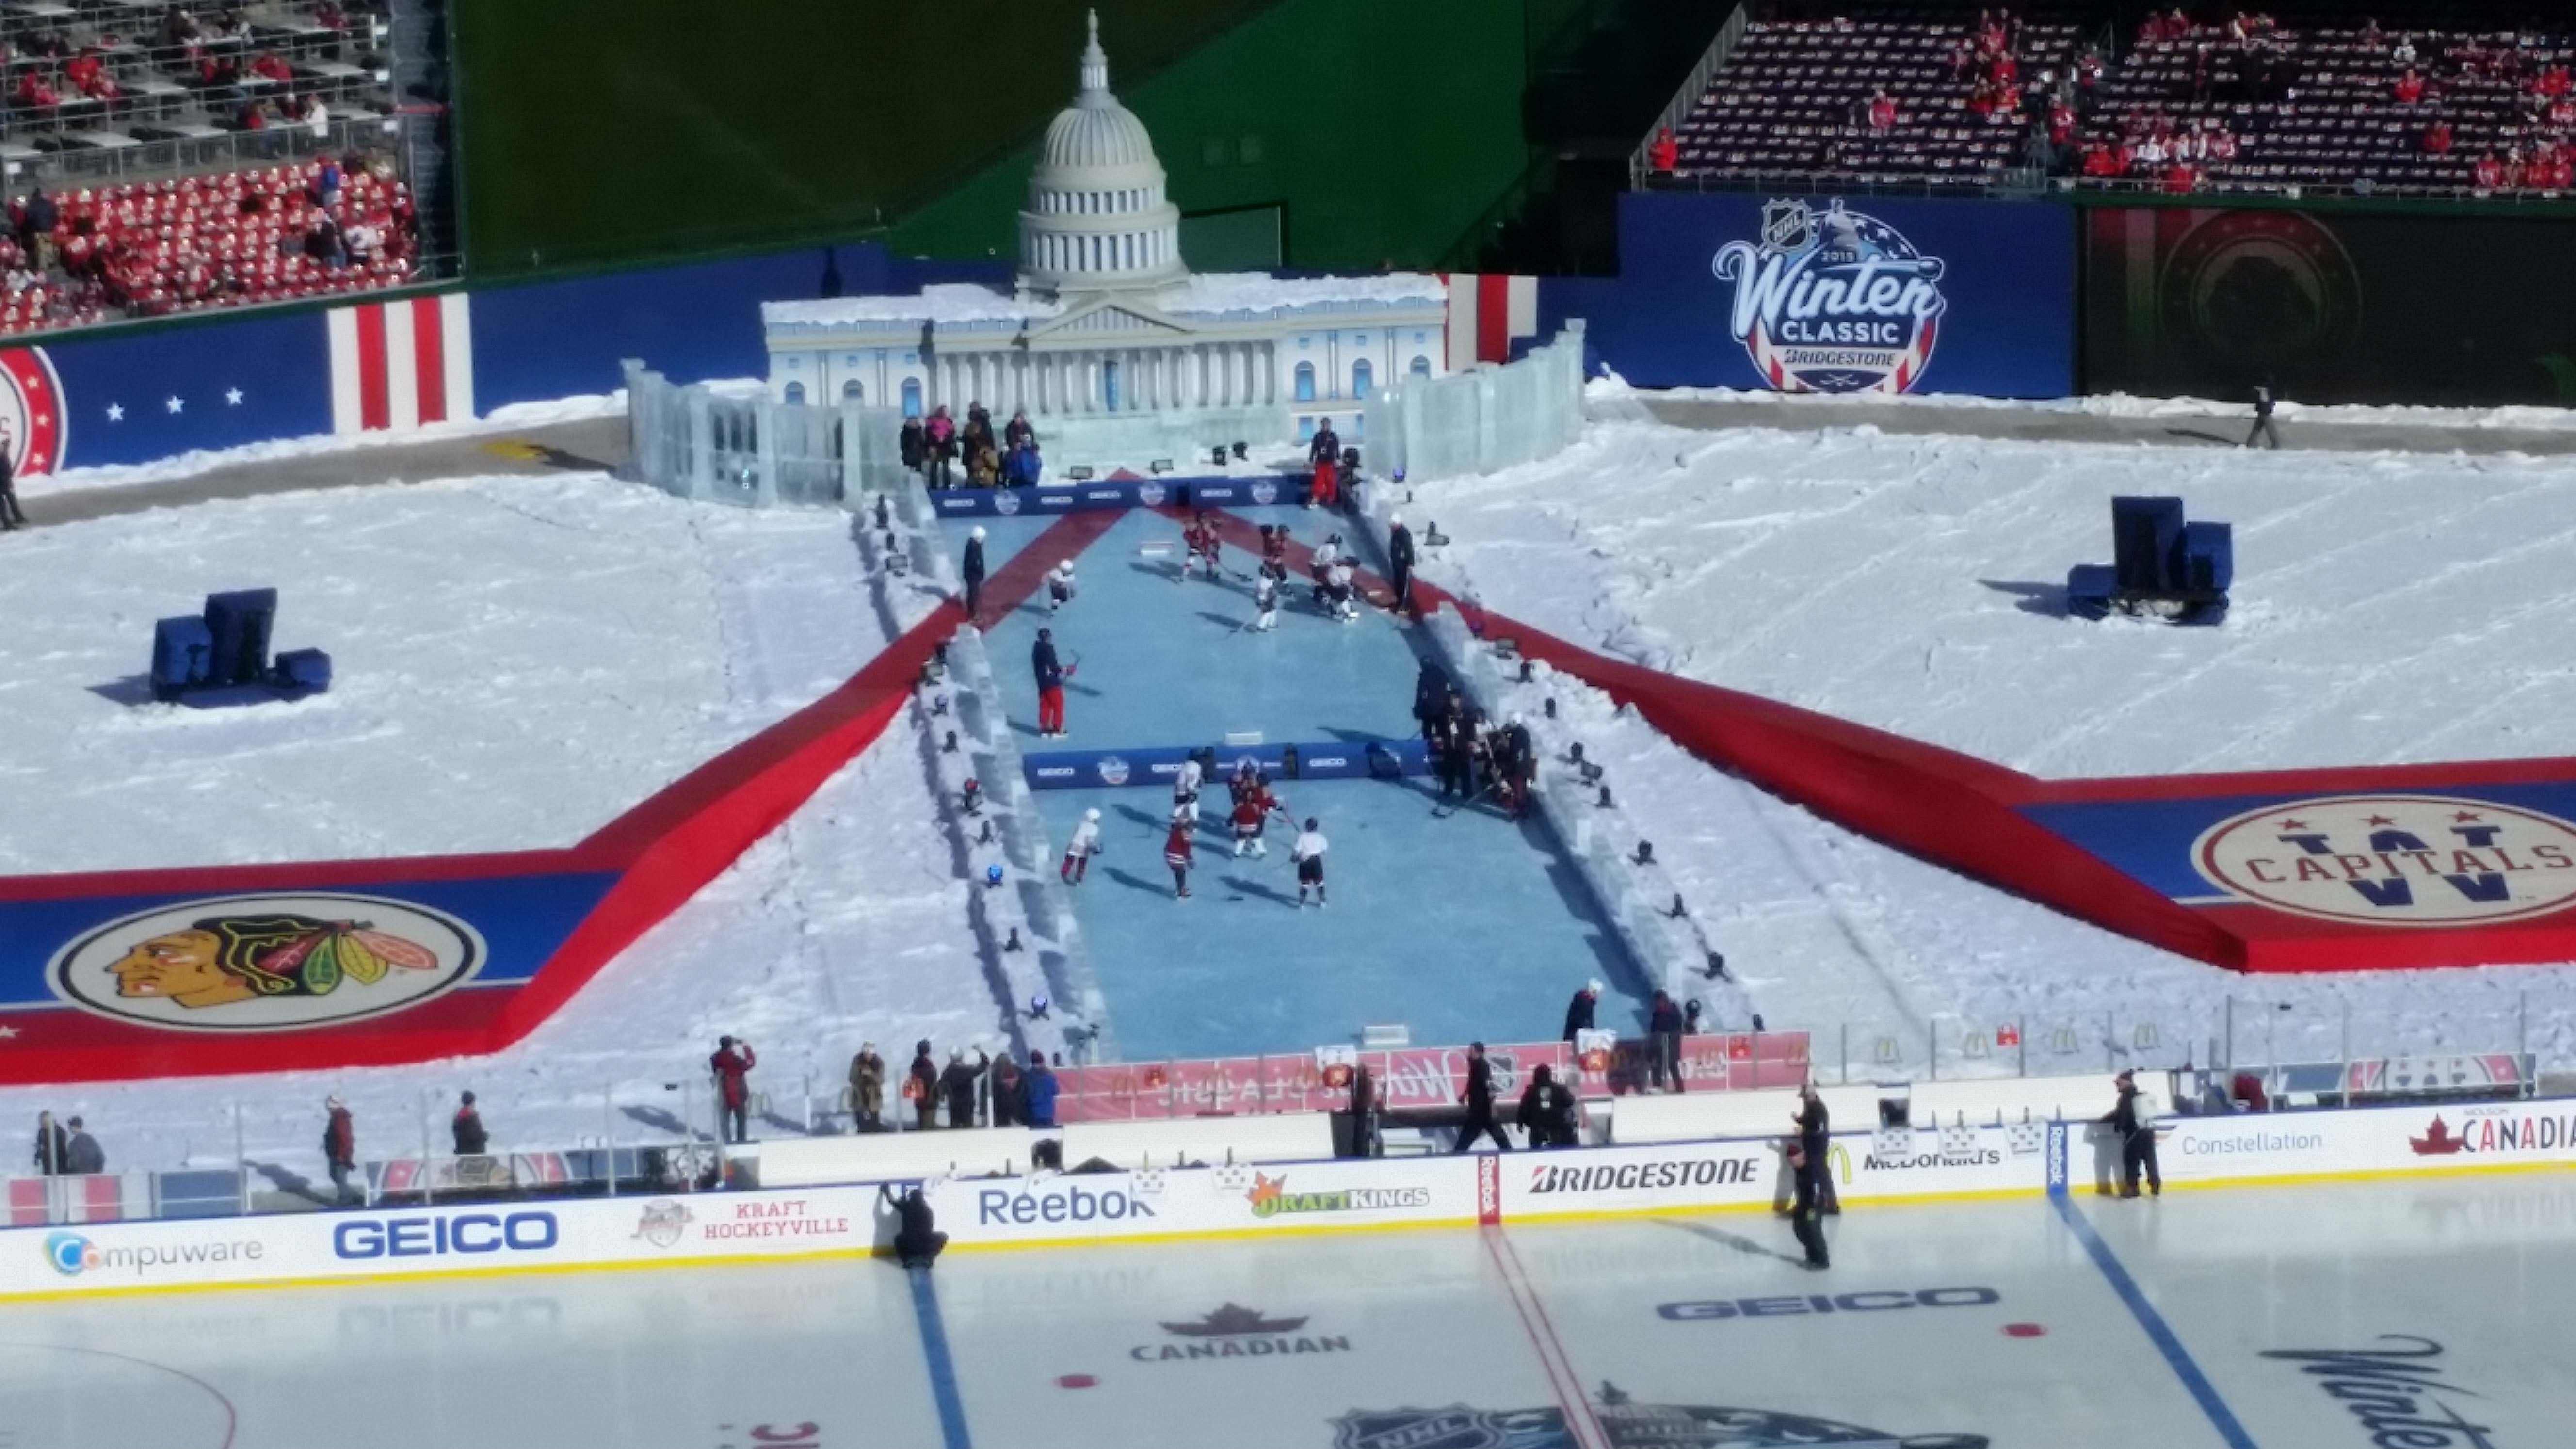 Live action from the Winter Classic